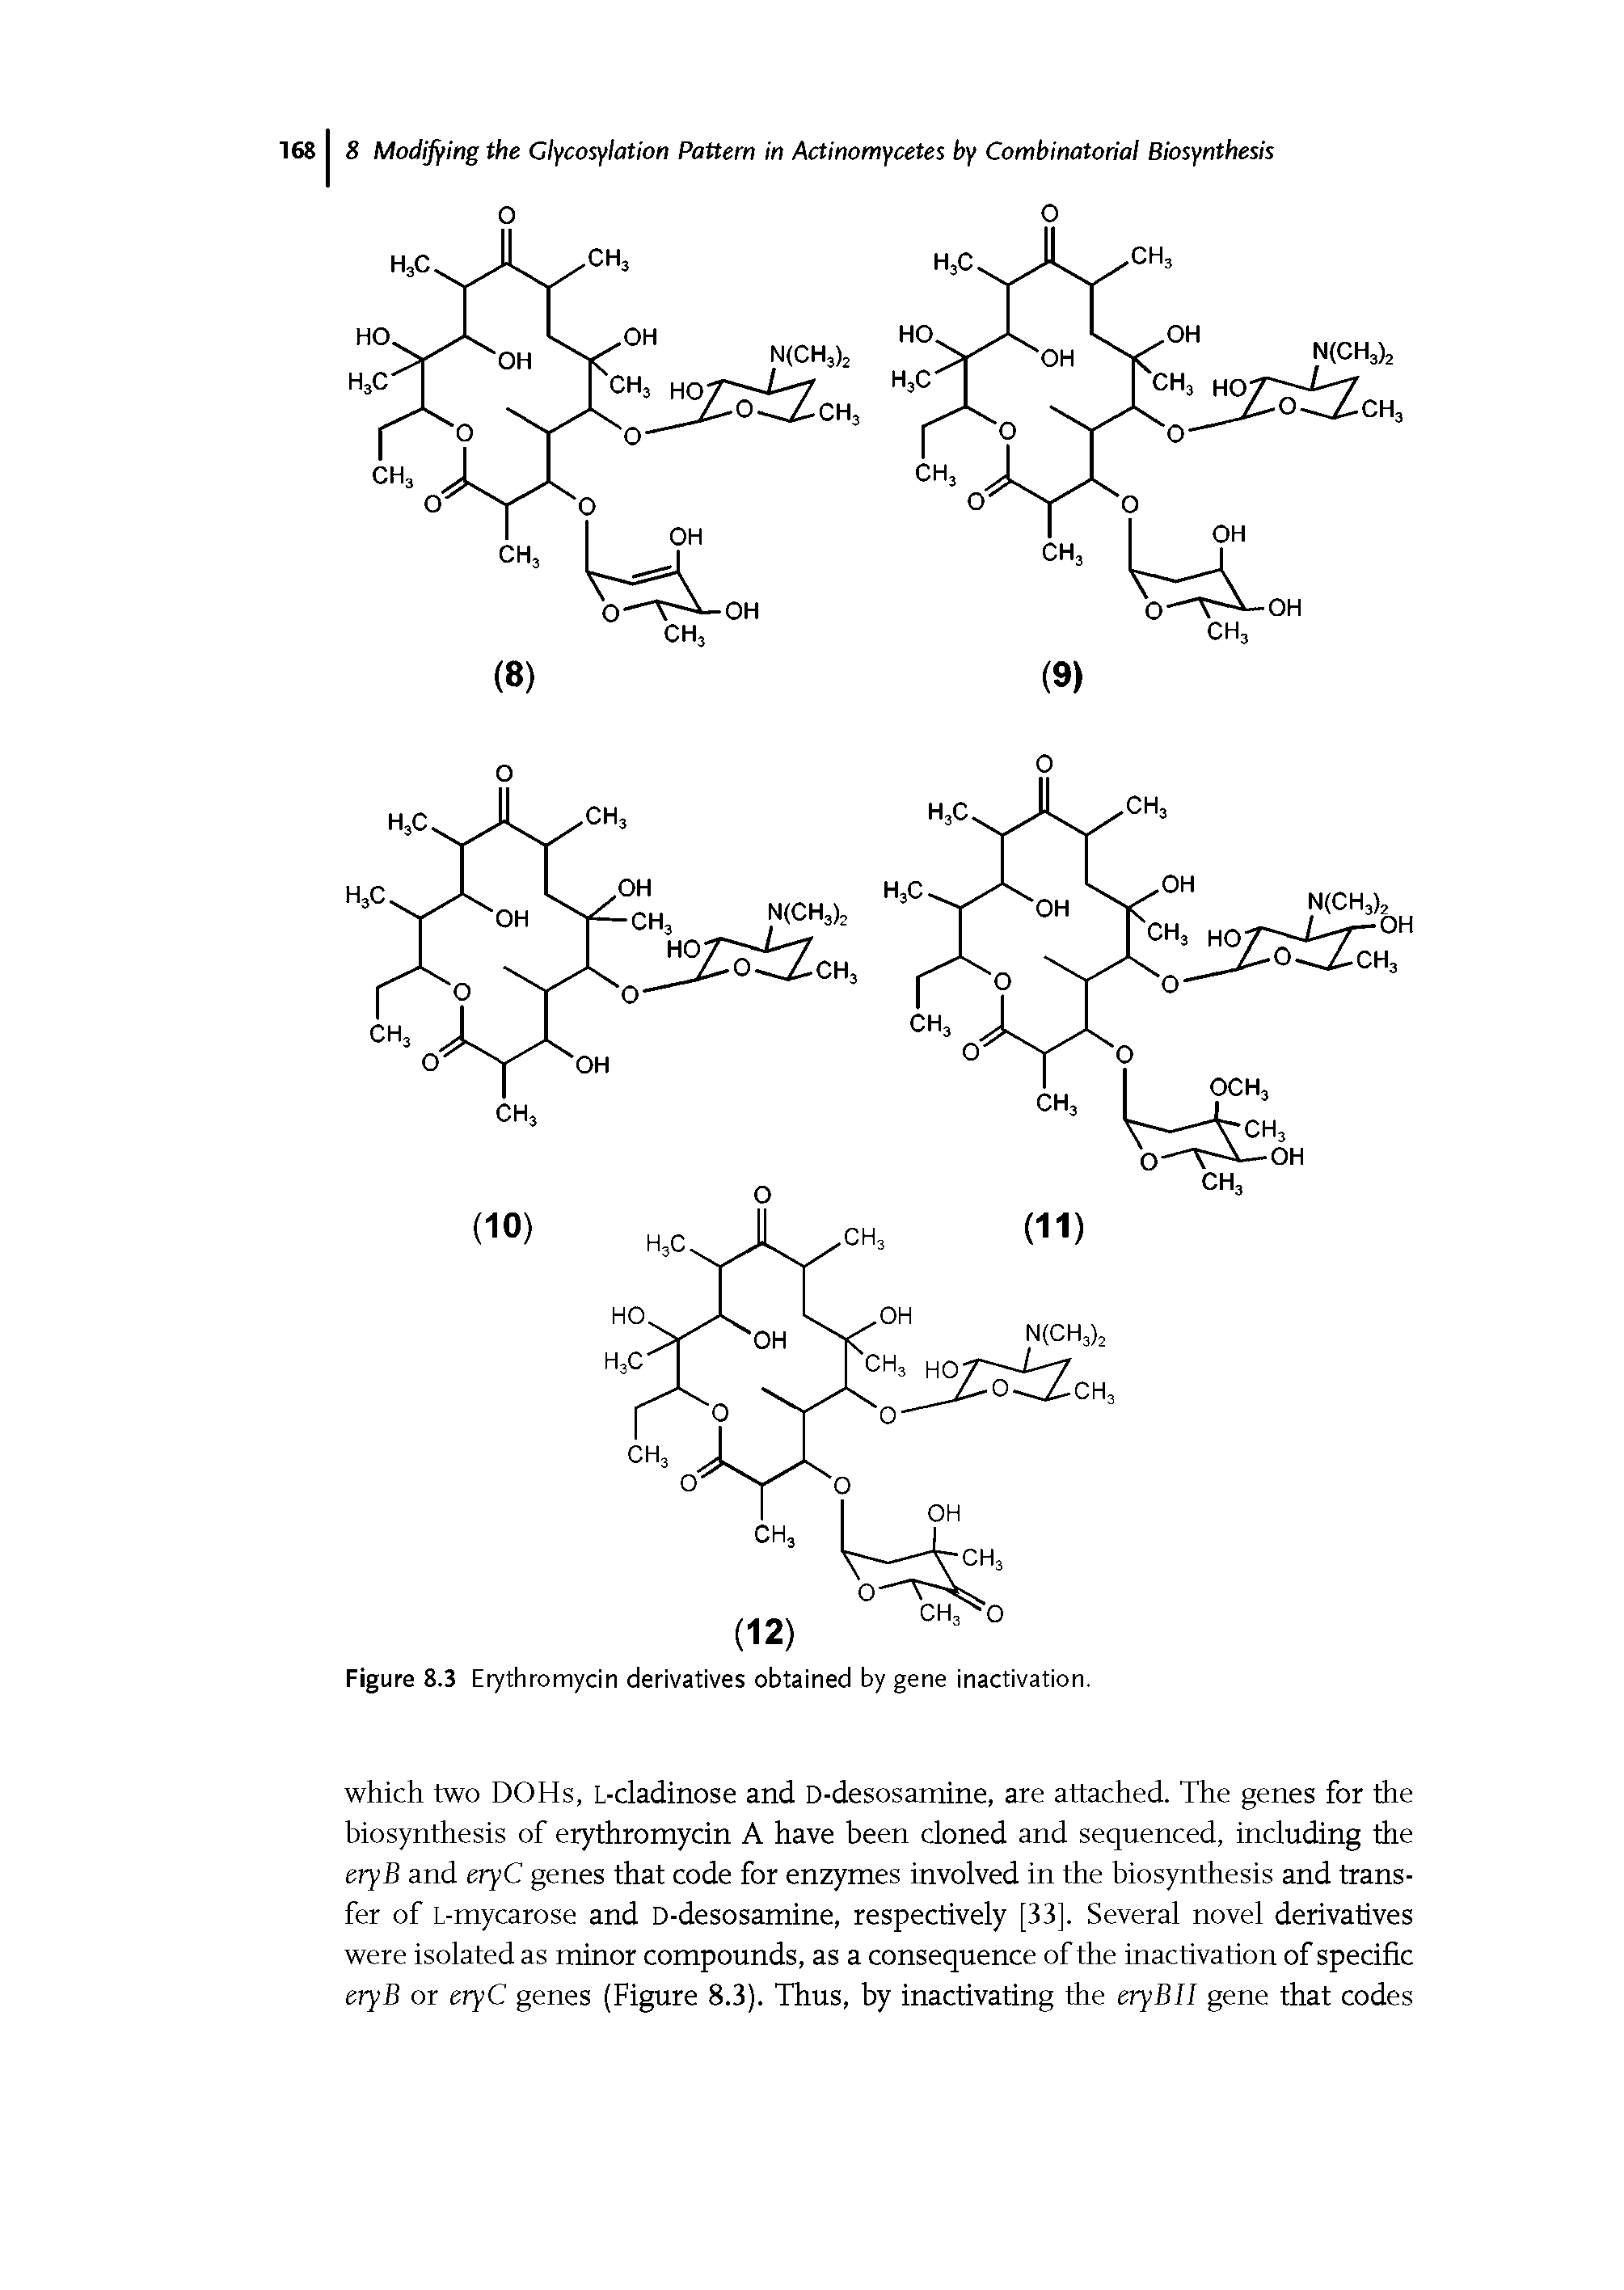 Figure 8.3 Erythromycin derivatives obtained by gene inactivation.